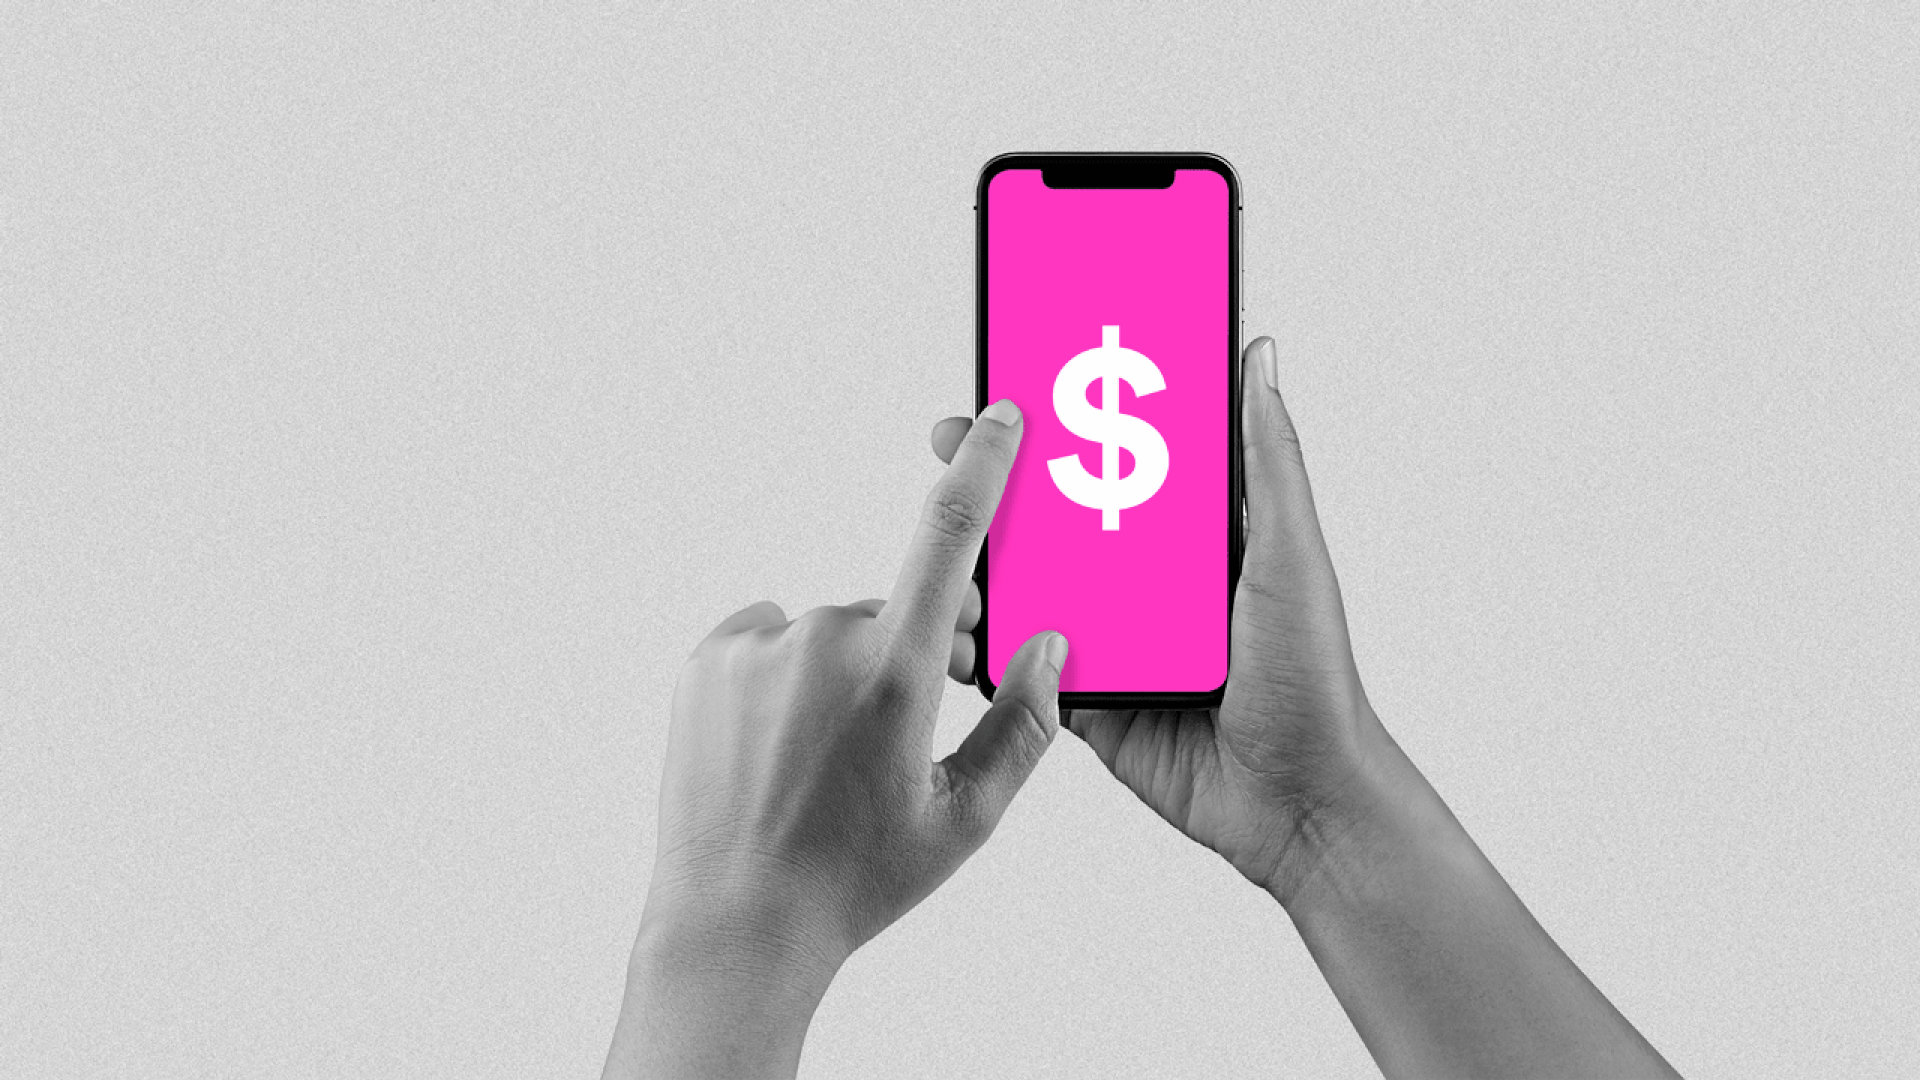 Illustration of a hand holding a phone glowing with Lyft pink while a dollar sign disappears from the screen.